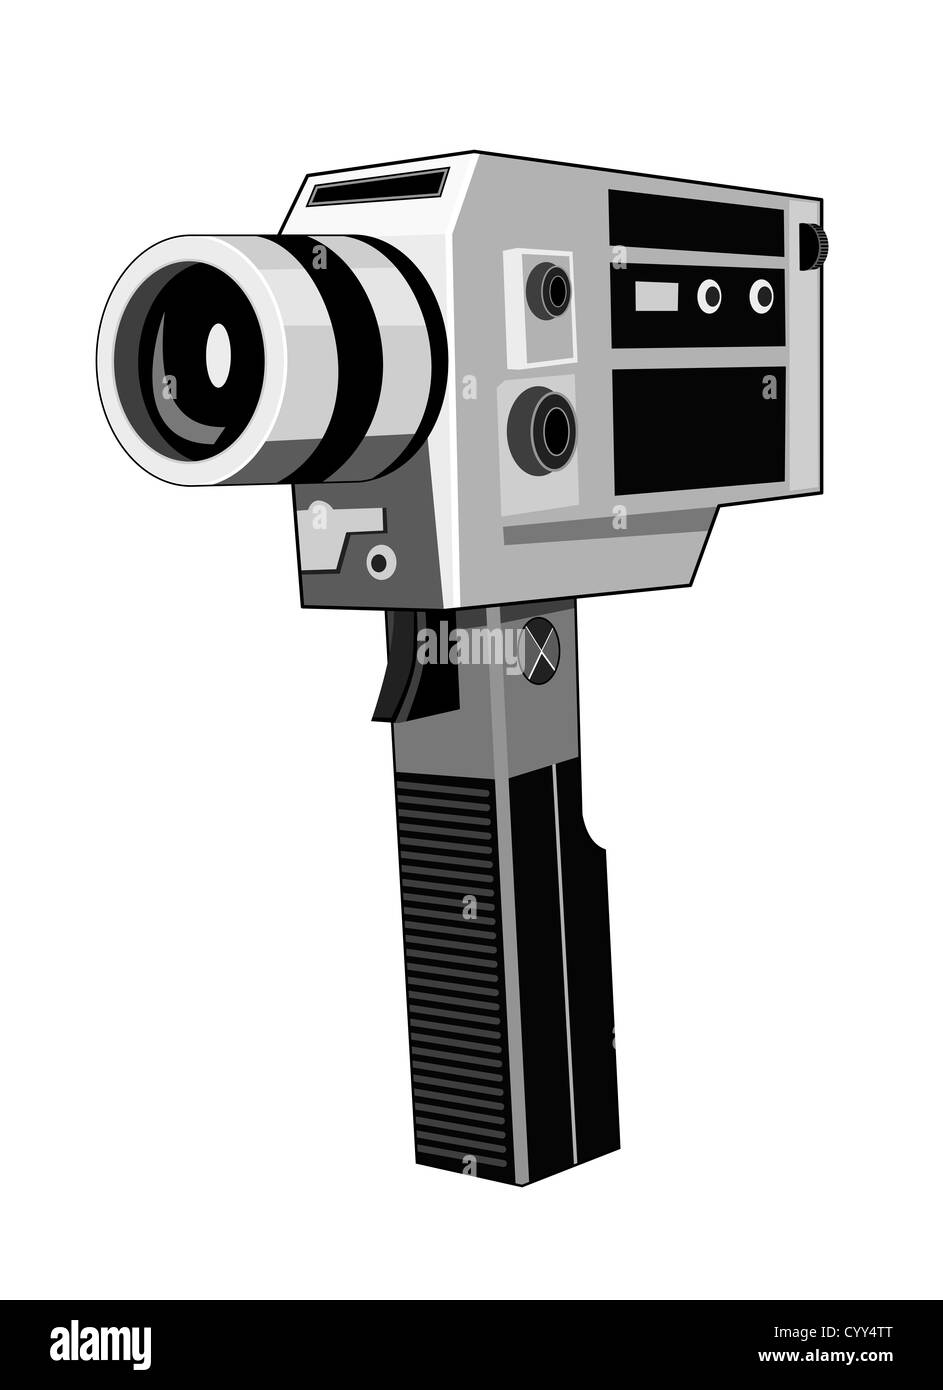 Illustration of a vintage video camera done in retro style. Stock Photo